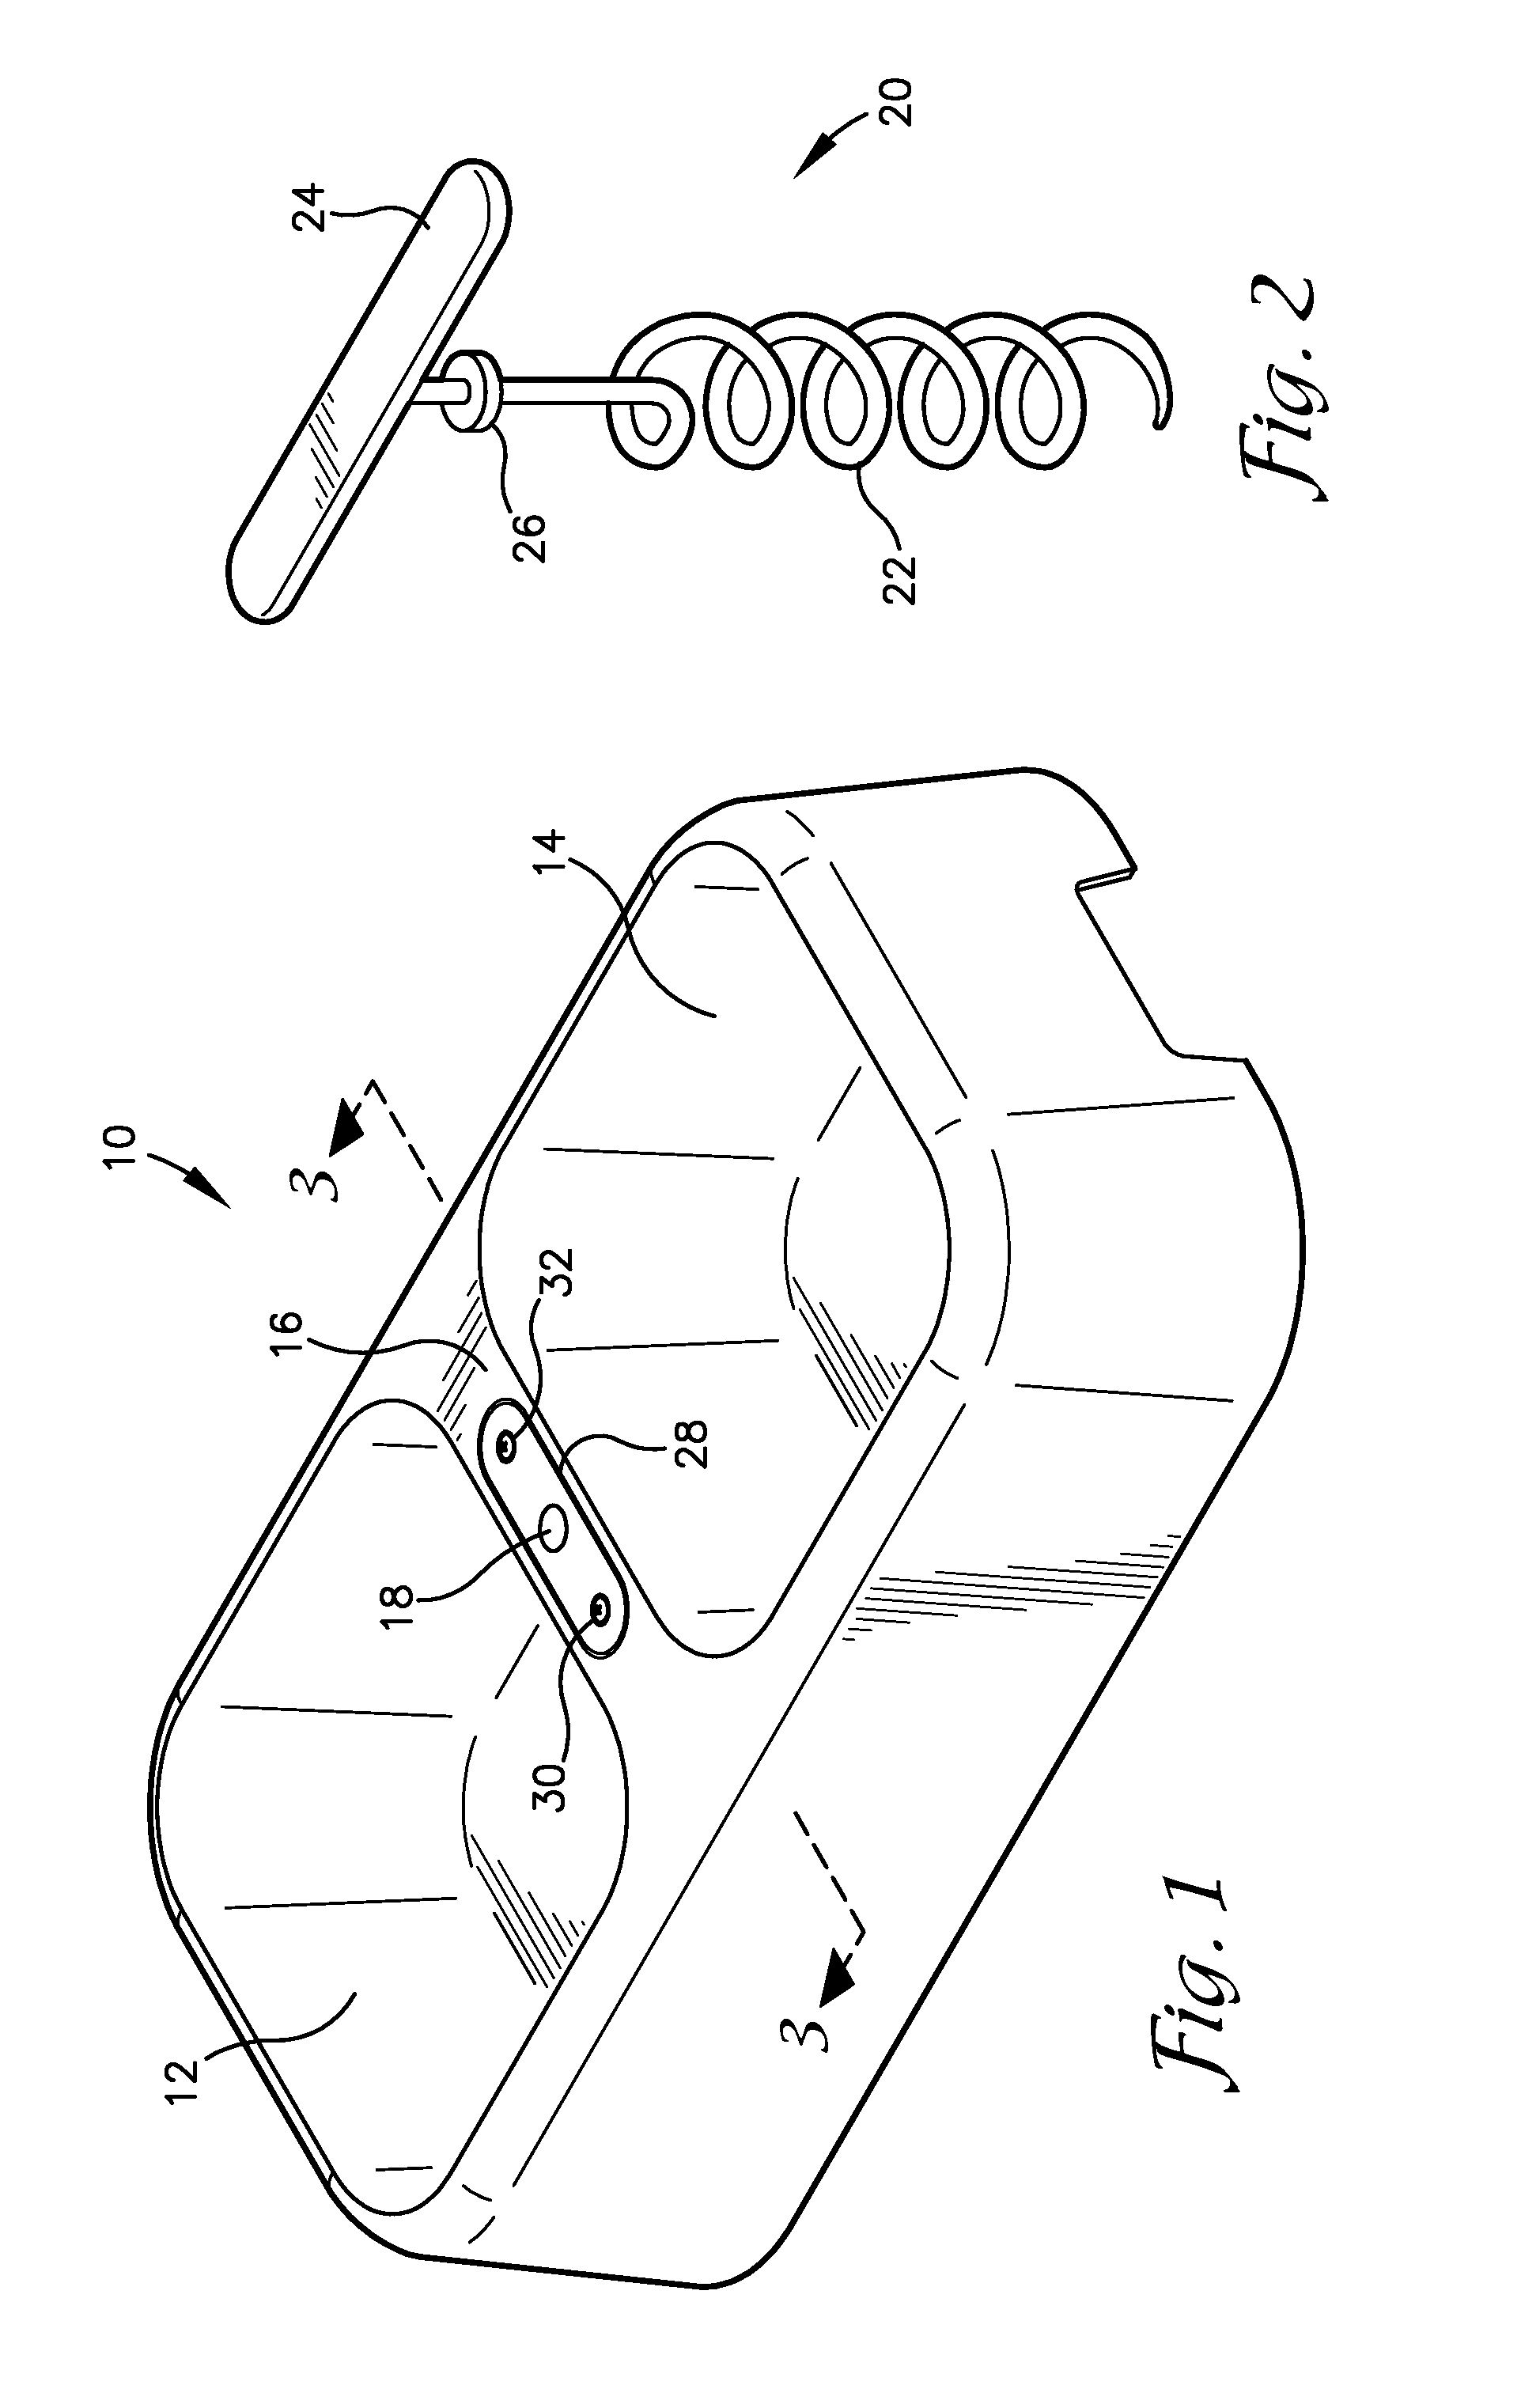 Container with anchoring mechanism